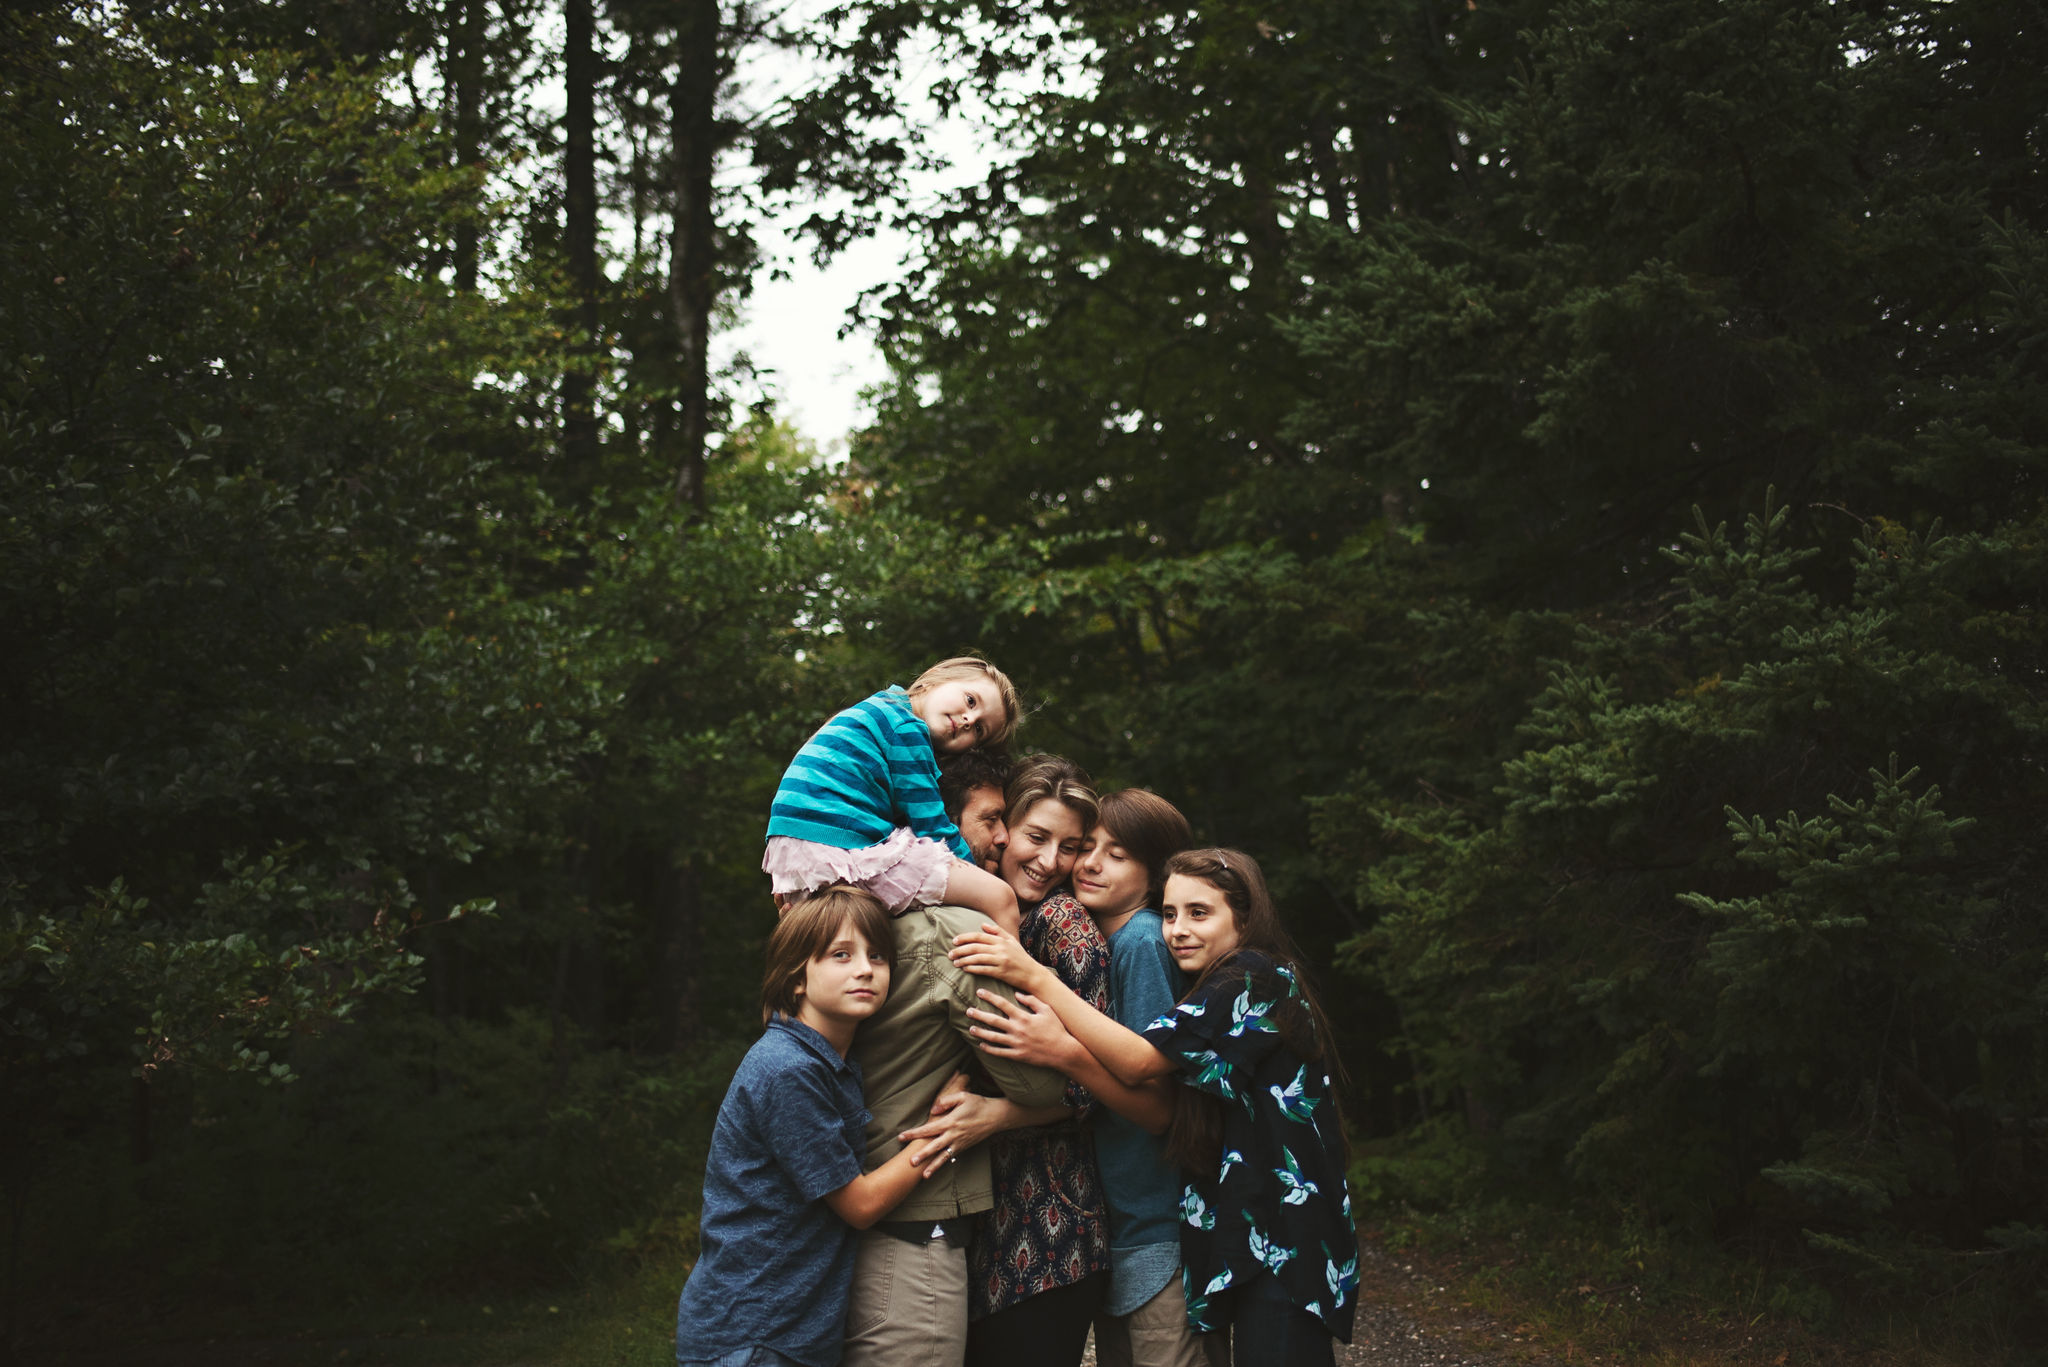 karra lynn photography - family session pricing - michigan detroit family photographer